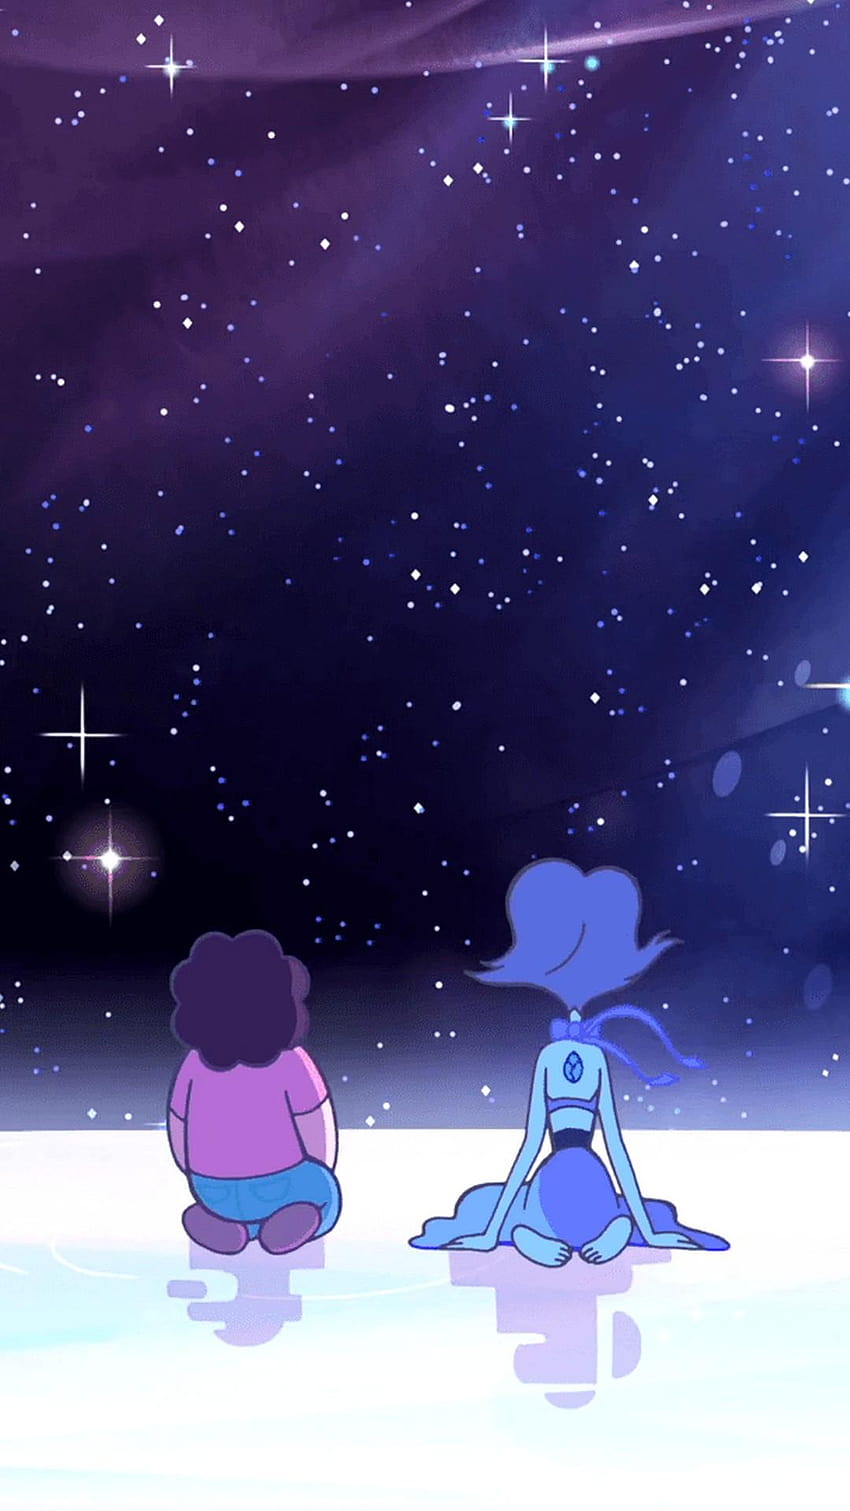 Steven Universe The Movie for iPhone, steven universe movie HD phone wallpaper